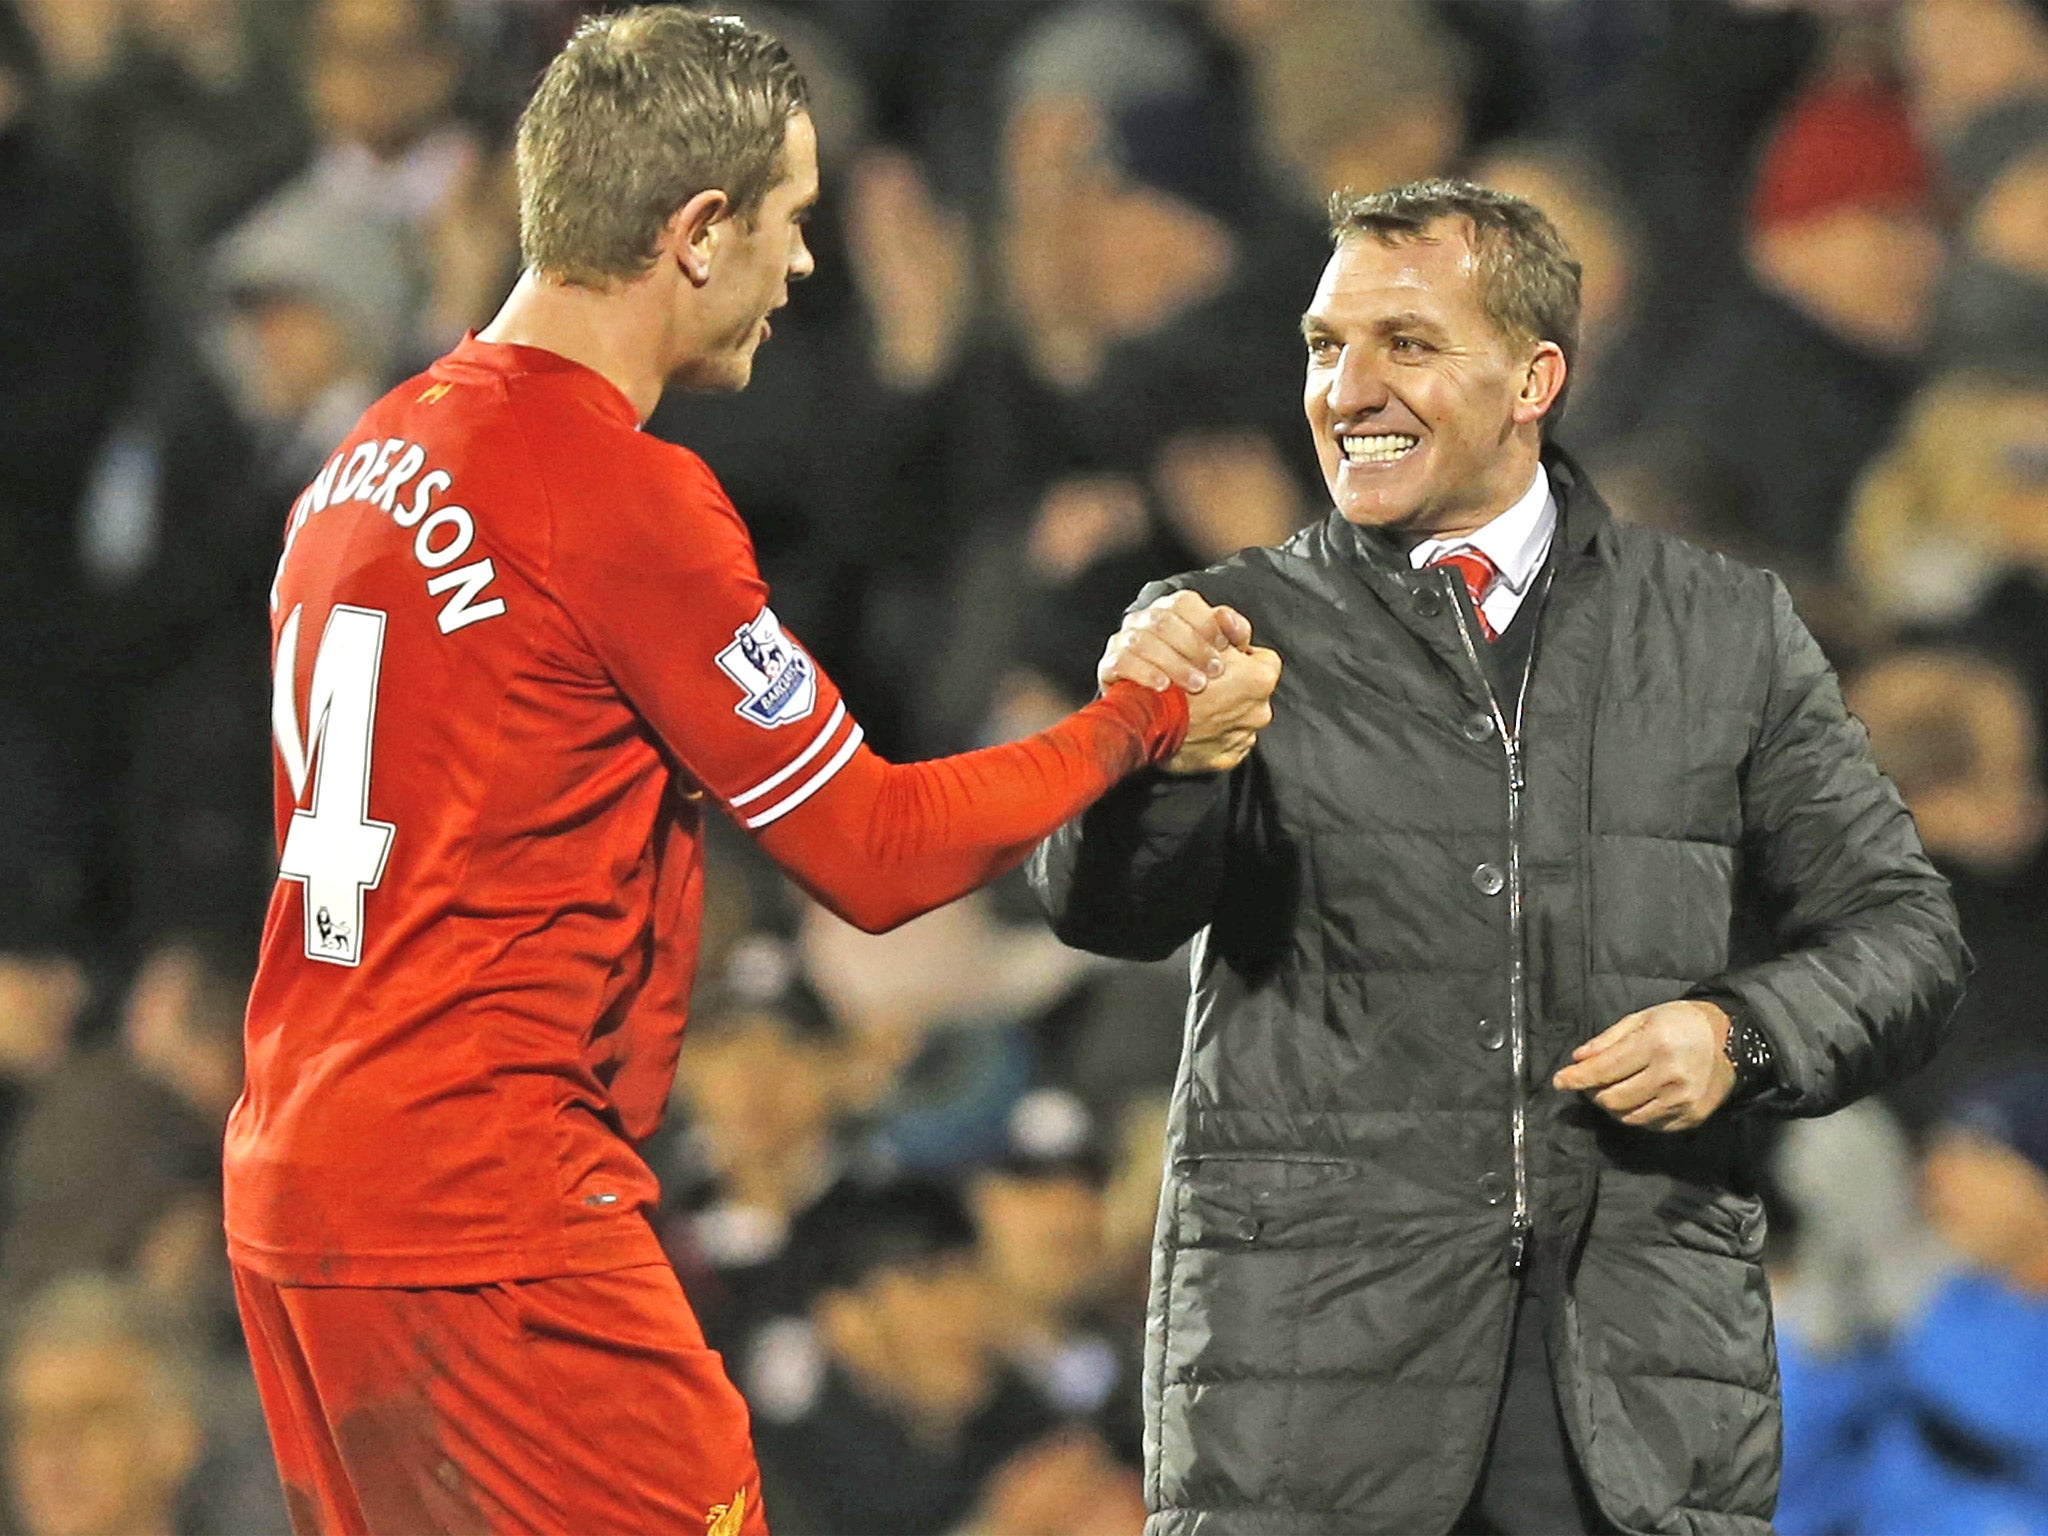 Liverpool manager Brendan Rodgers shares the joy of a hard-fought victory with midfielder Jordan Henderson